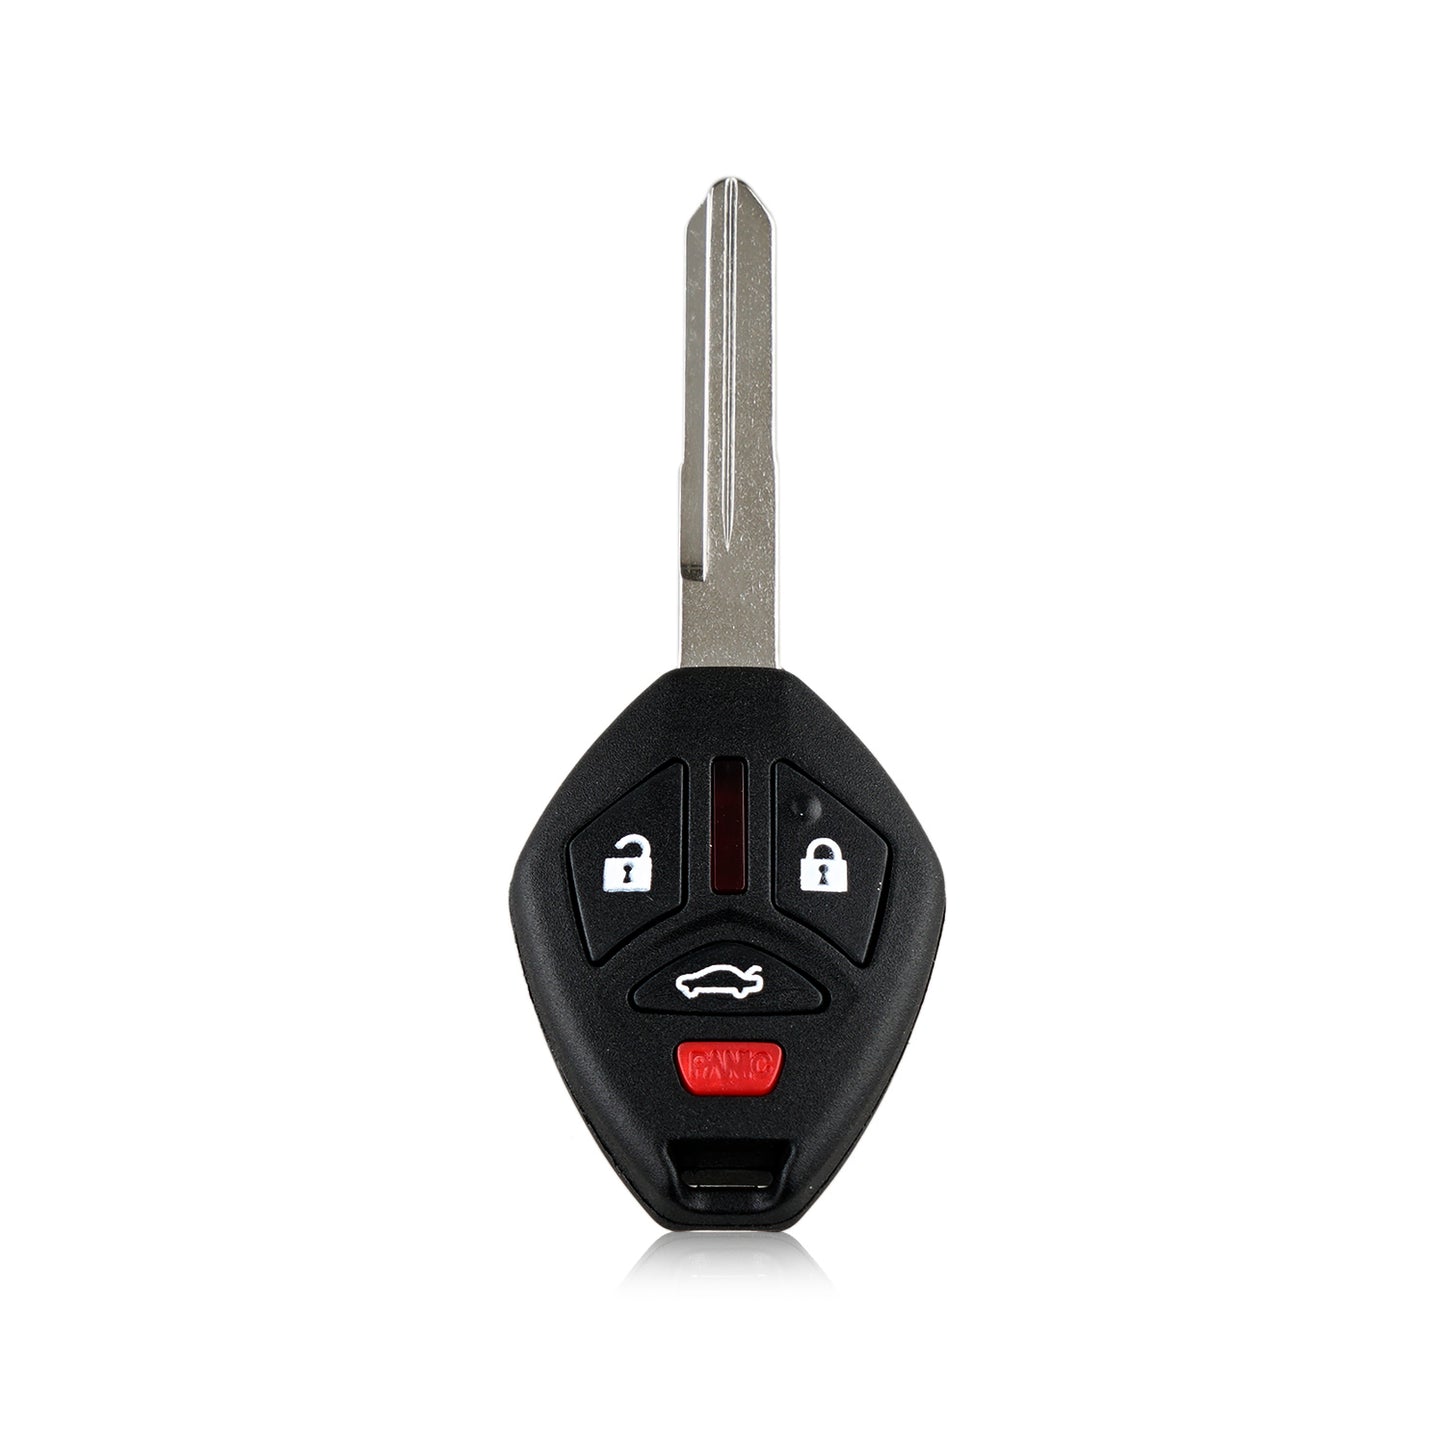 4 Buttons 315MHz Keyless Entry Fob Remote Car Key For 2006 - 2007 Mitsubishi Eclipse Galant FCC ID: OUCG8D-620M-A SKU : J106